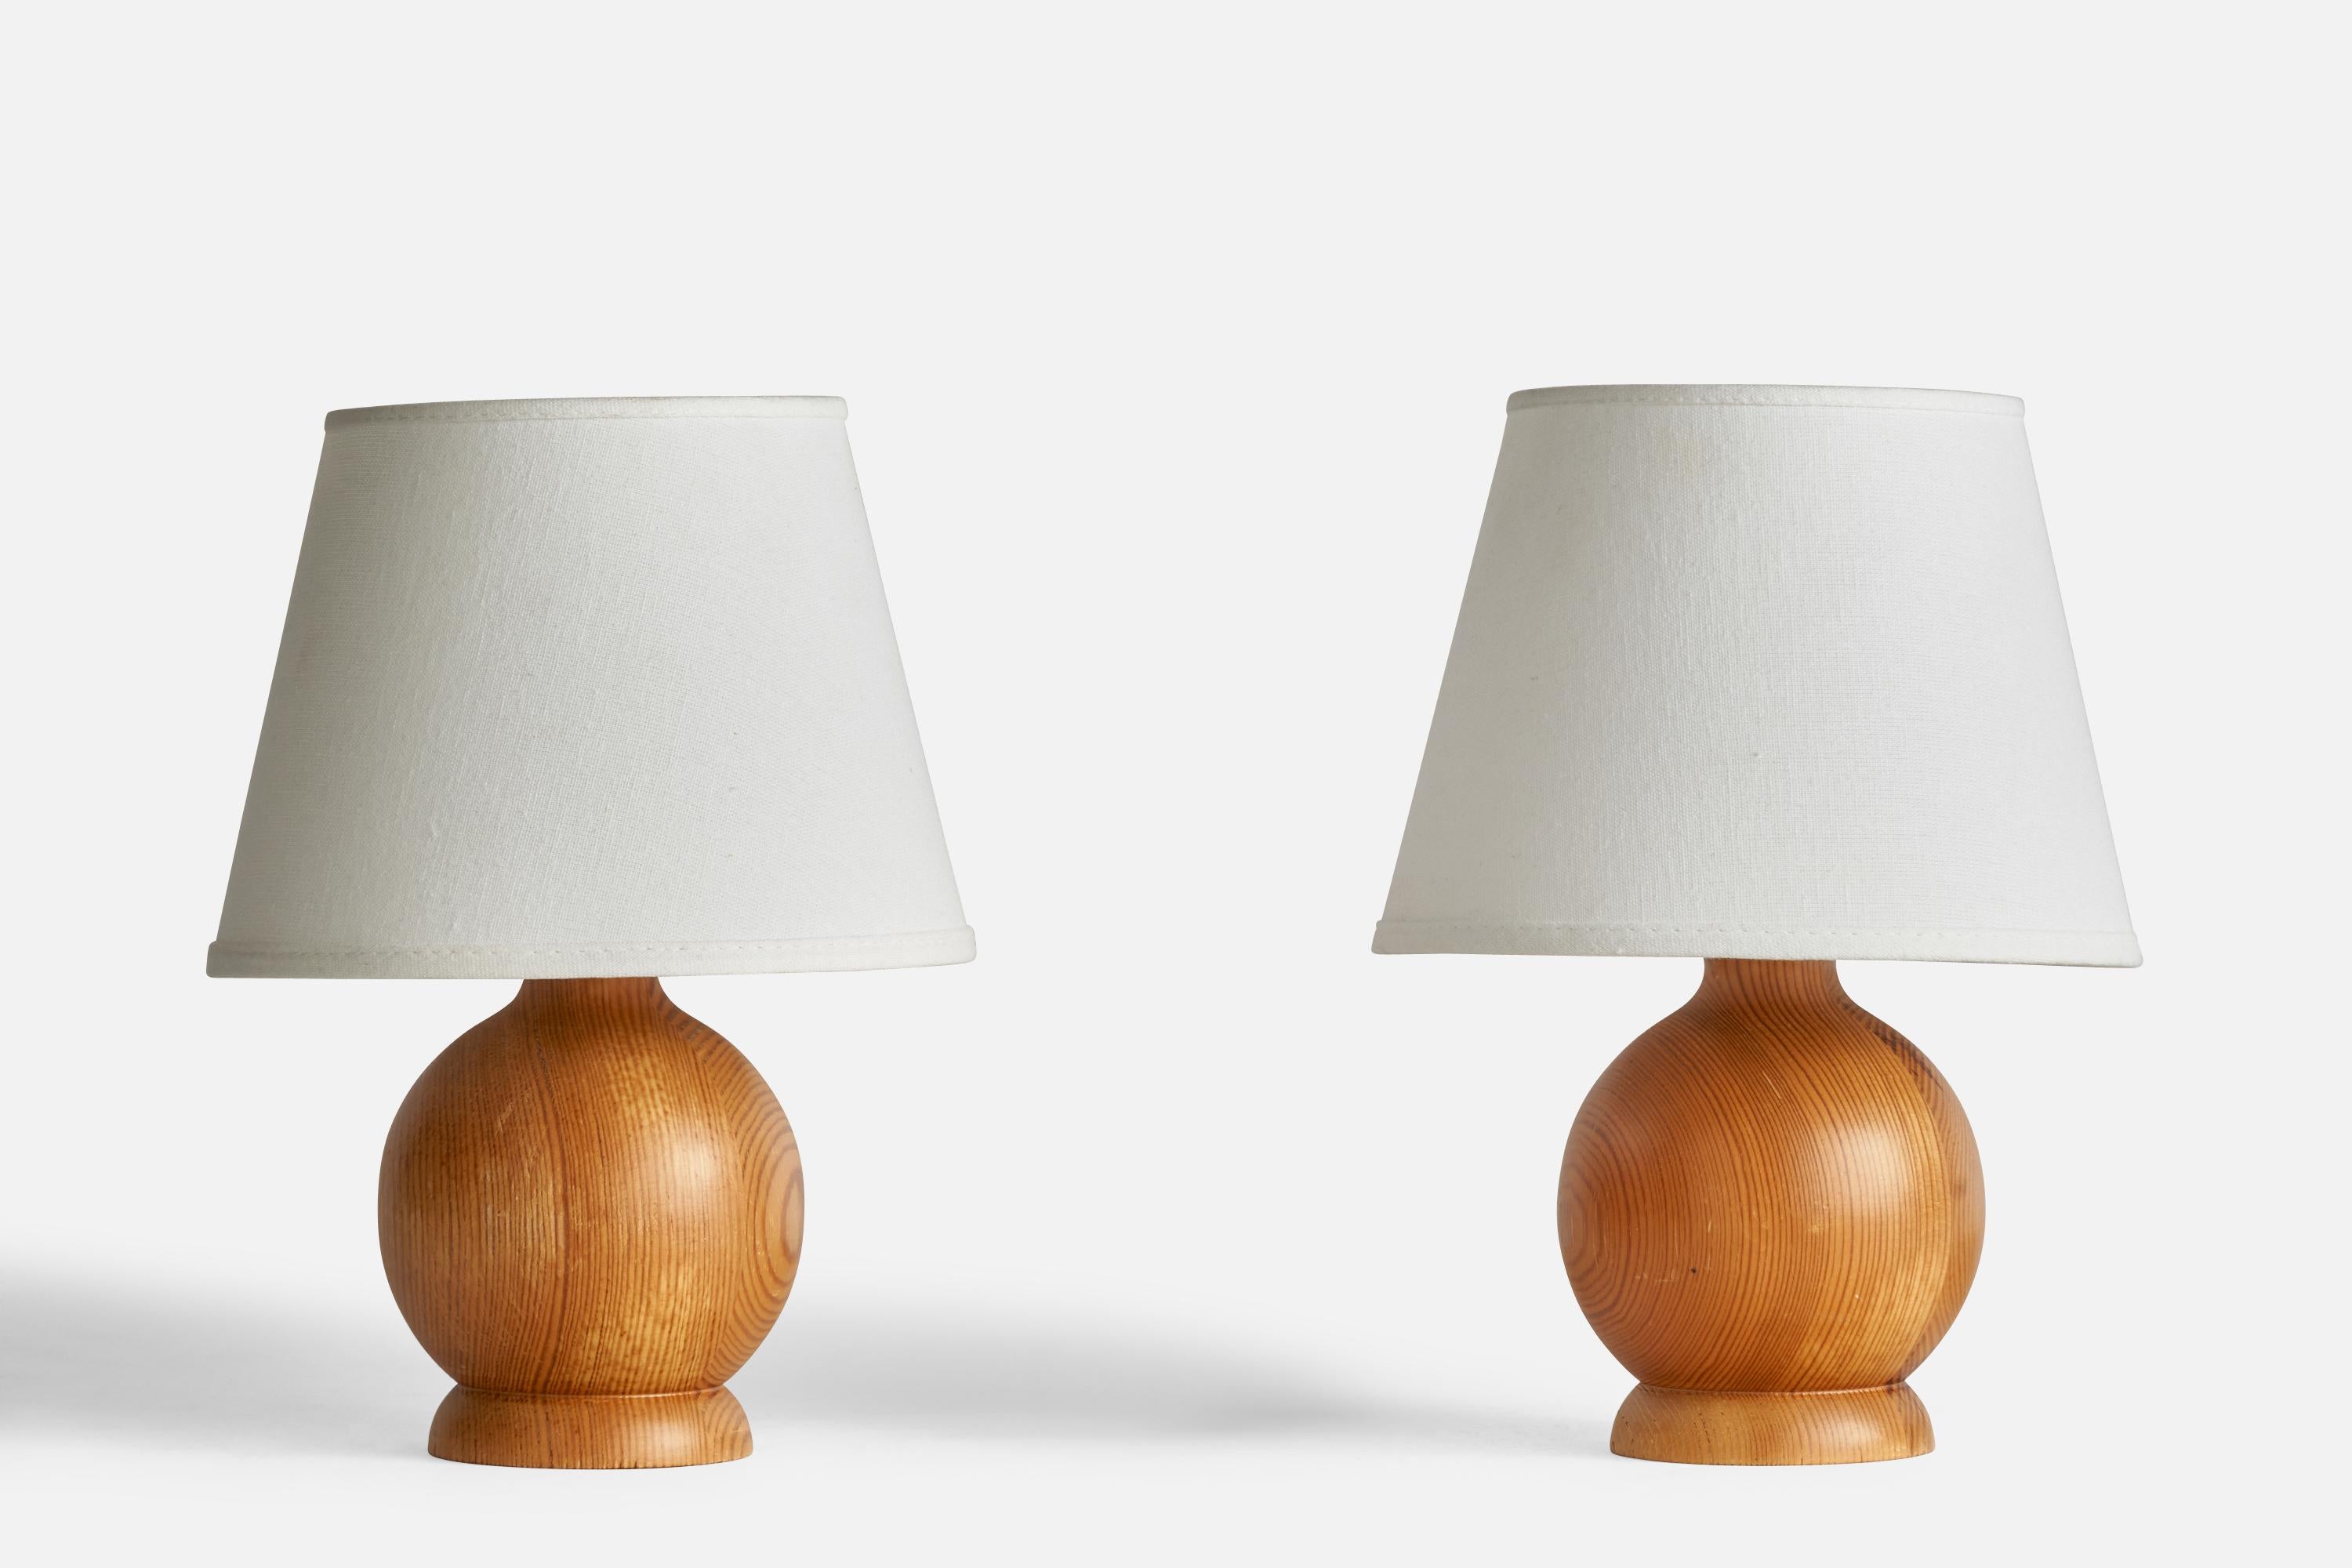 A pair of pine table lamps designed and produced in Sweden, 1970s.

Dimensions of Lamp (inches): 8.6” H x 4.45” Diameter
Dimensions of Shade (inches): 5” Top Diameter x 8” Bottom Diameter x 6” H
Dimensions of Lamp with Shade (inches): 12” H x 8”